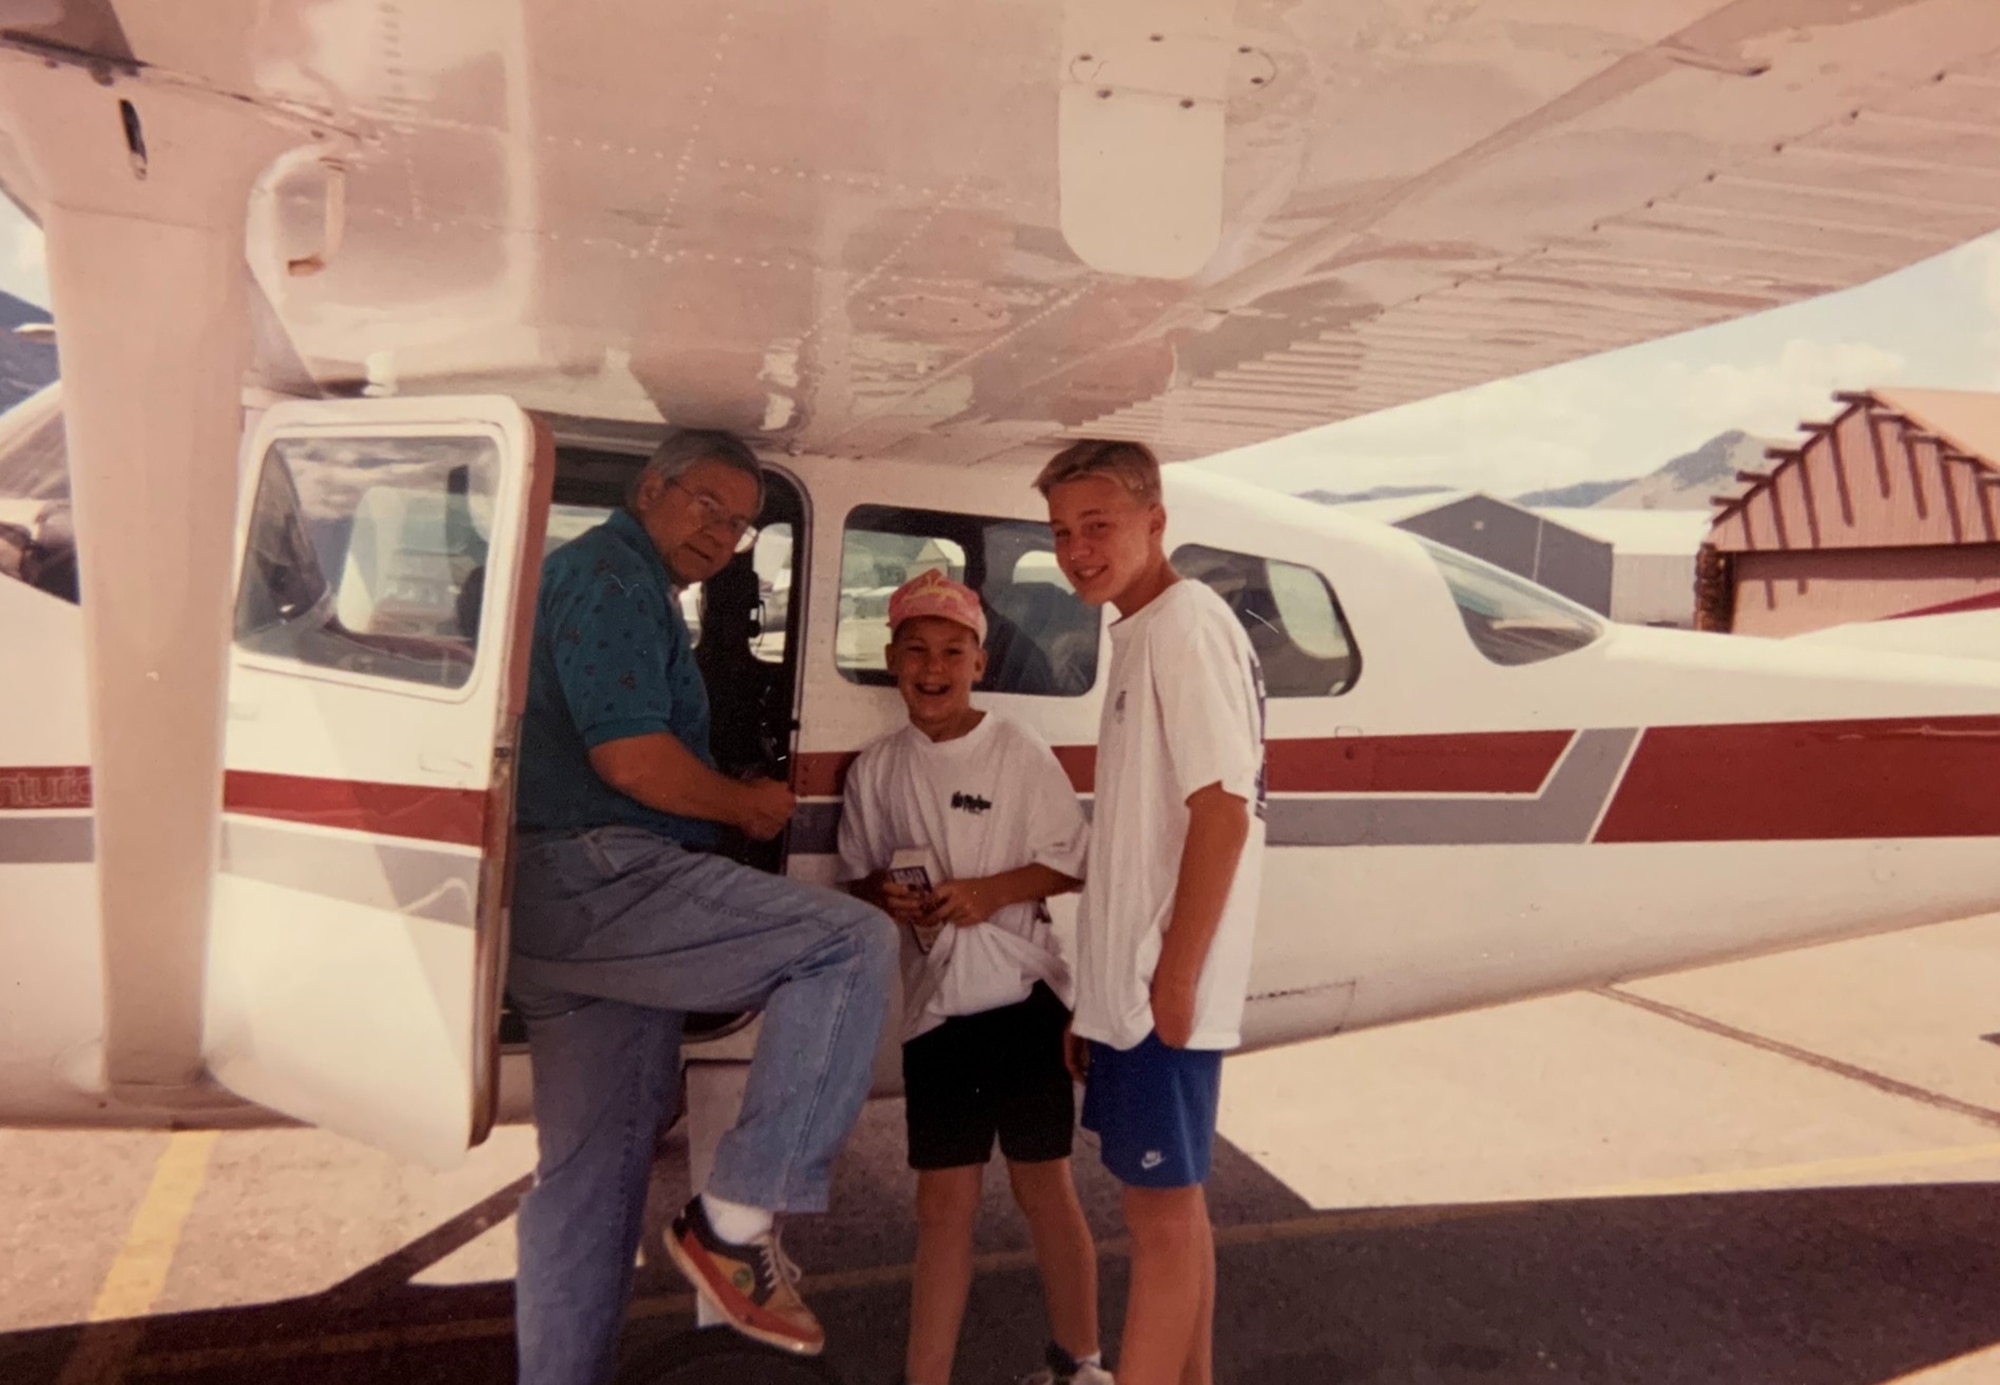 Col. Nicolas Henschel is shown in this family photo with his father and brother at their airplane.